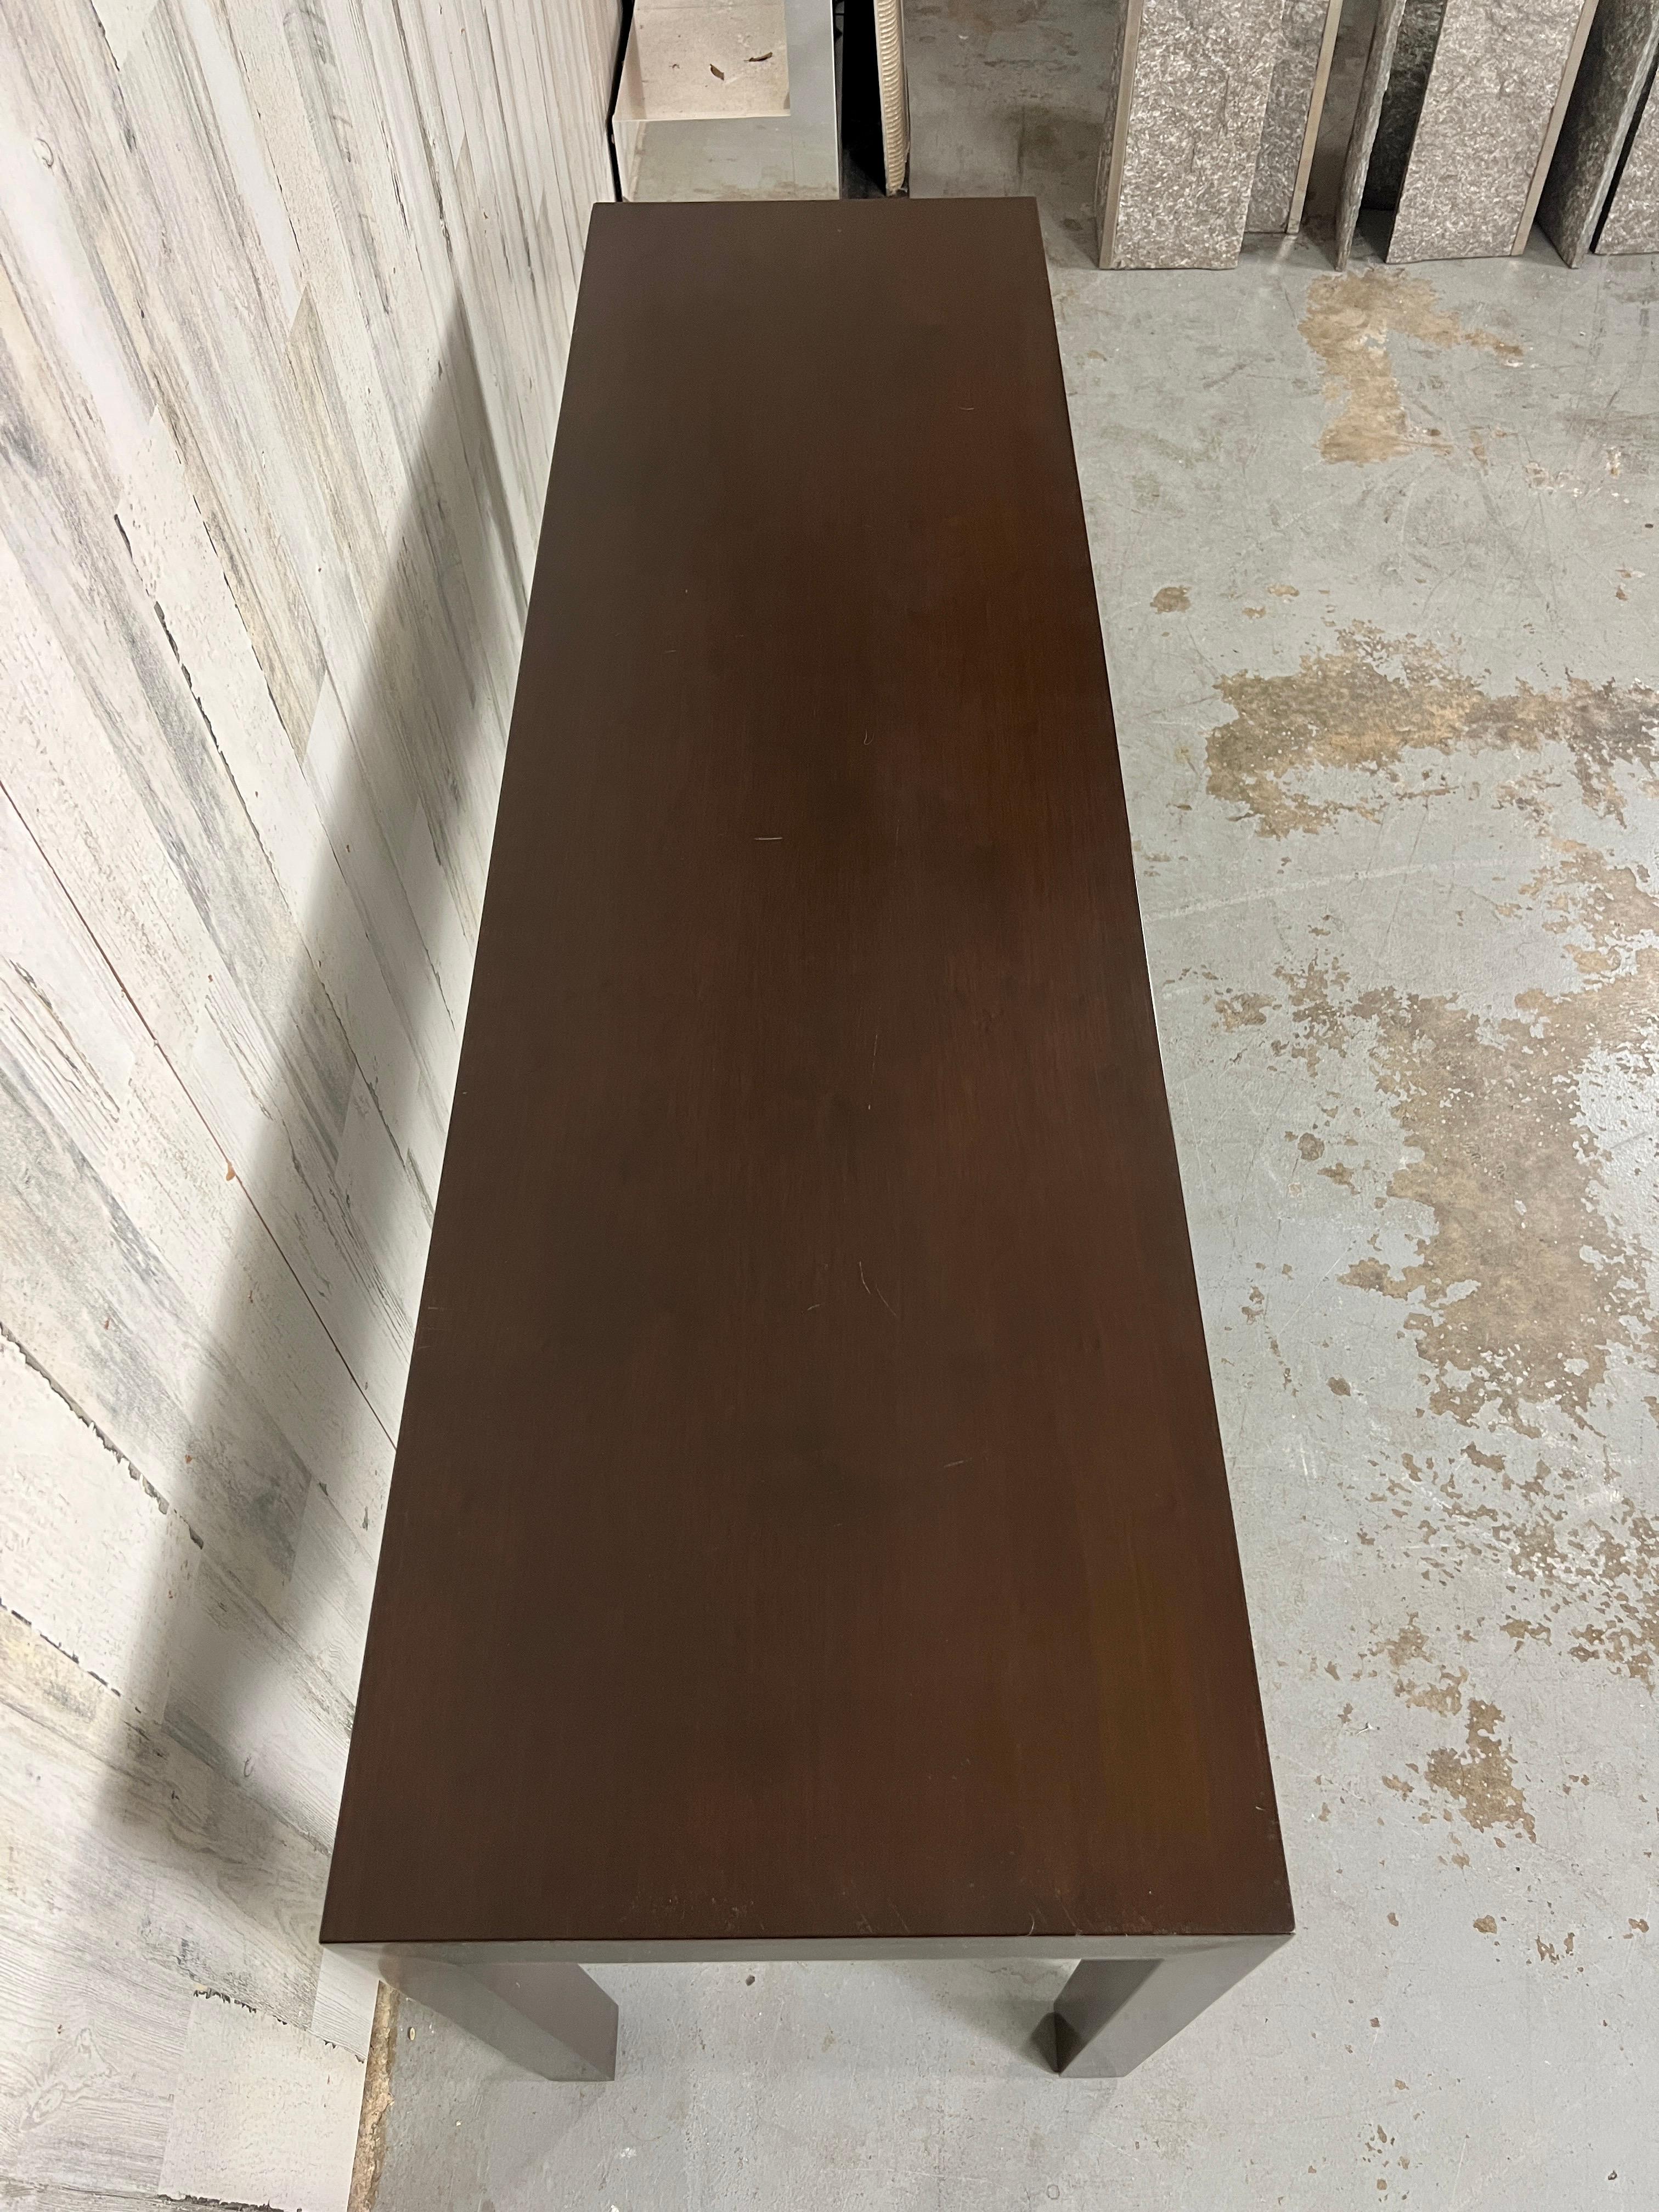 Dunbar Mahogany Console Table In Good Condition For Sale In Denton, TX